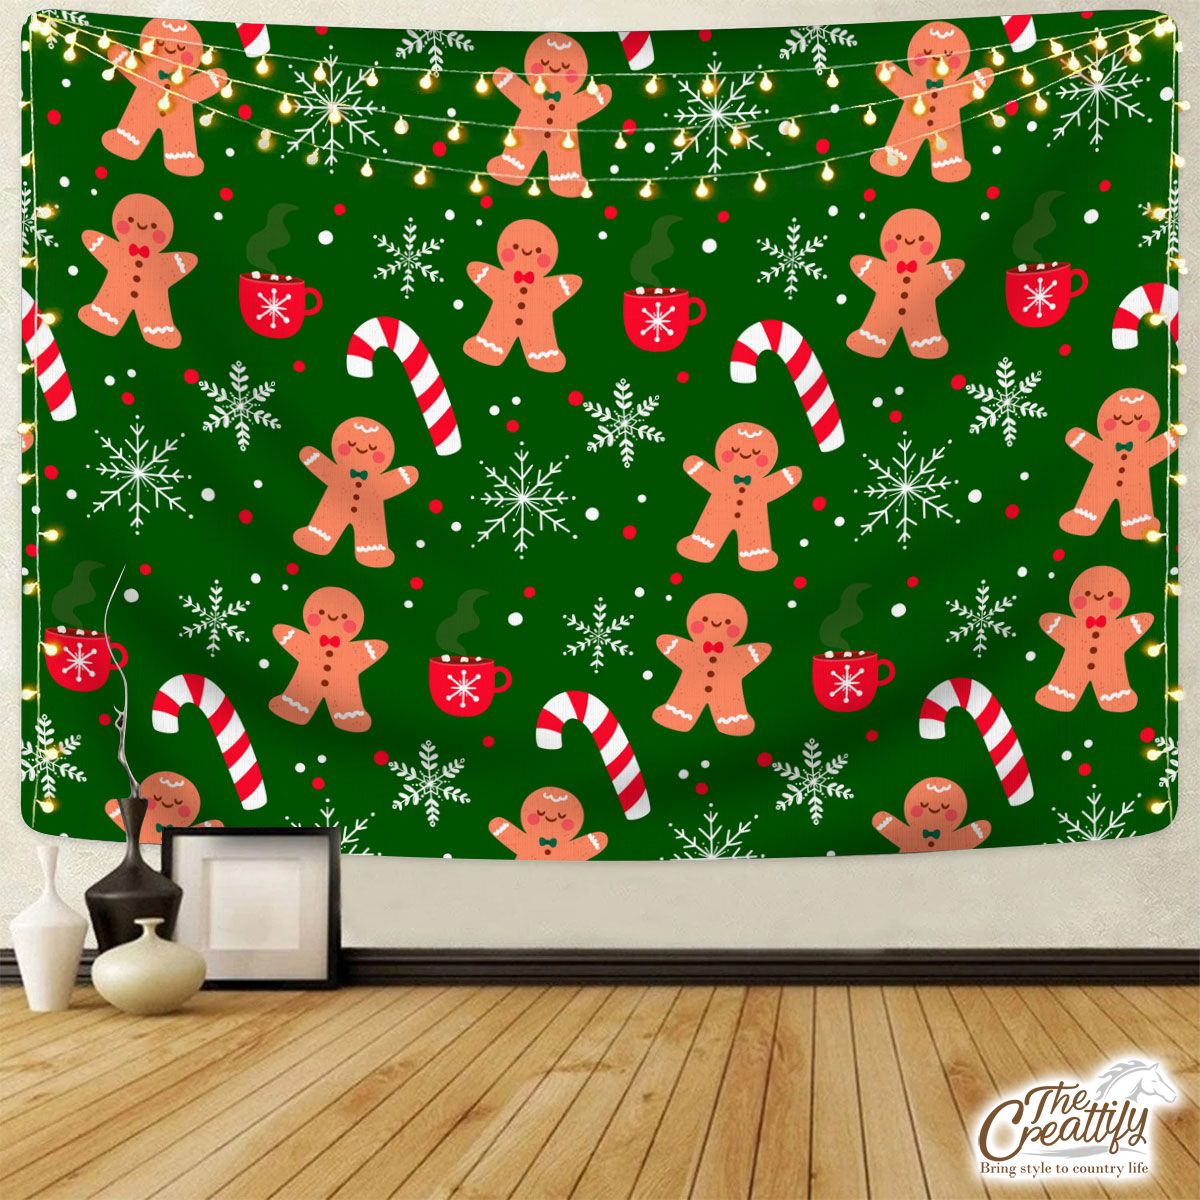 Red Green And White Gingerbread Man, Candy Cane With Snowflake Tapestry